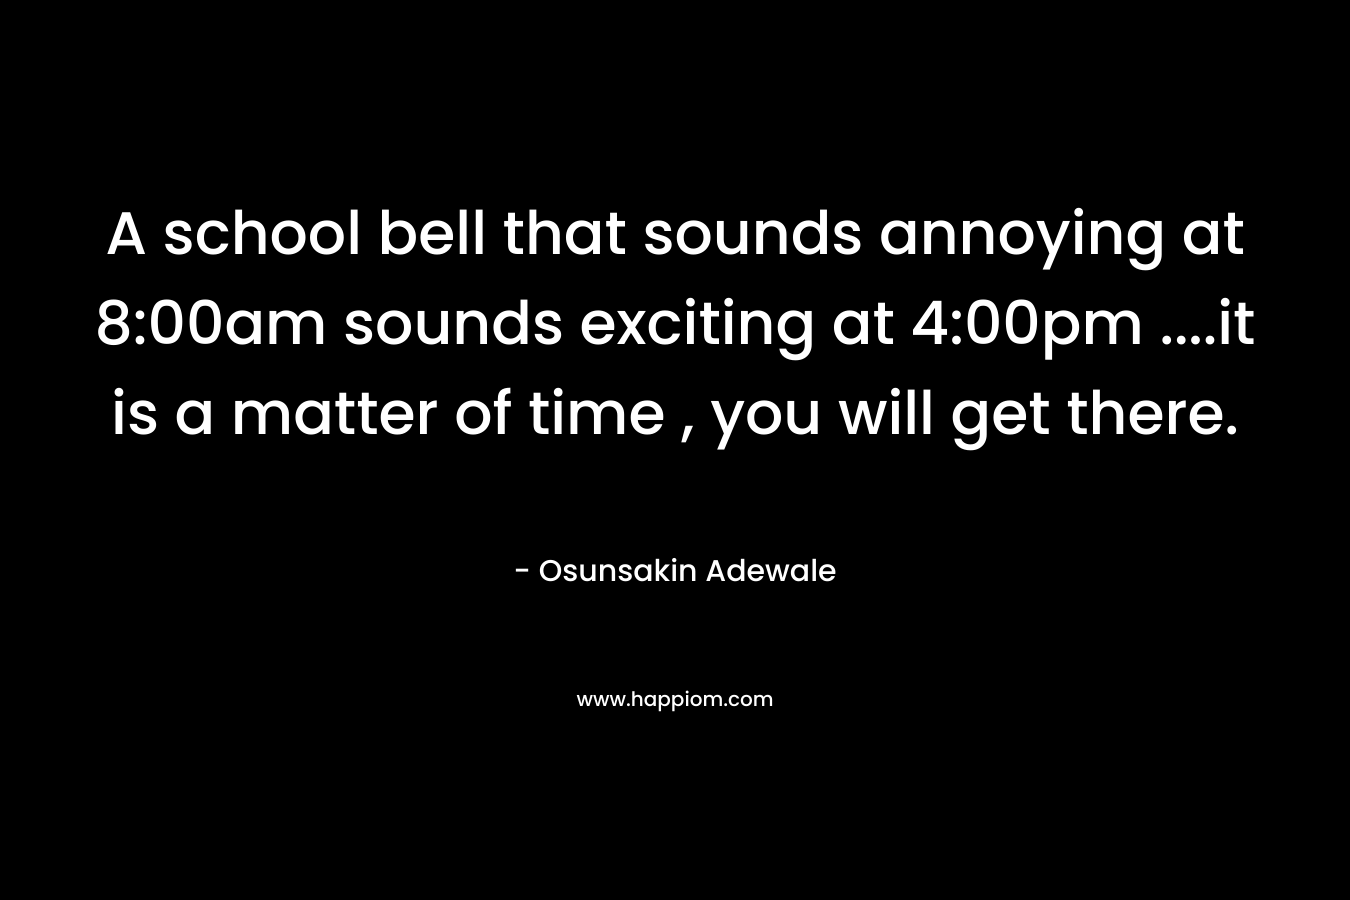 A school bell that sounds annoying at 8:00am sounds exciting at 4:00pm ....it is a matter of time , you will get there.